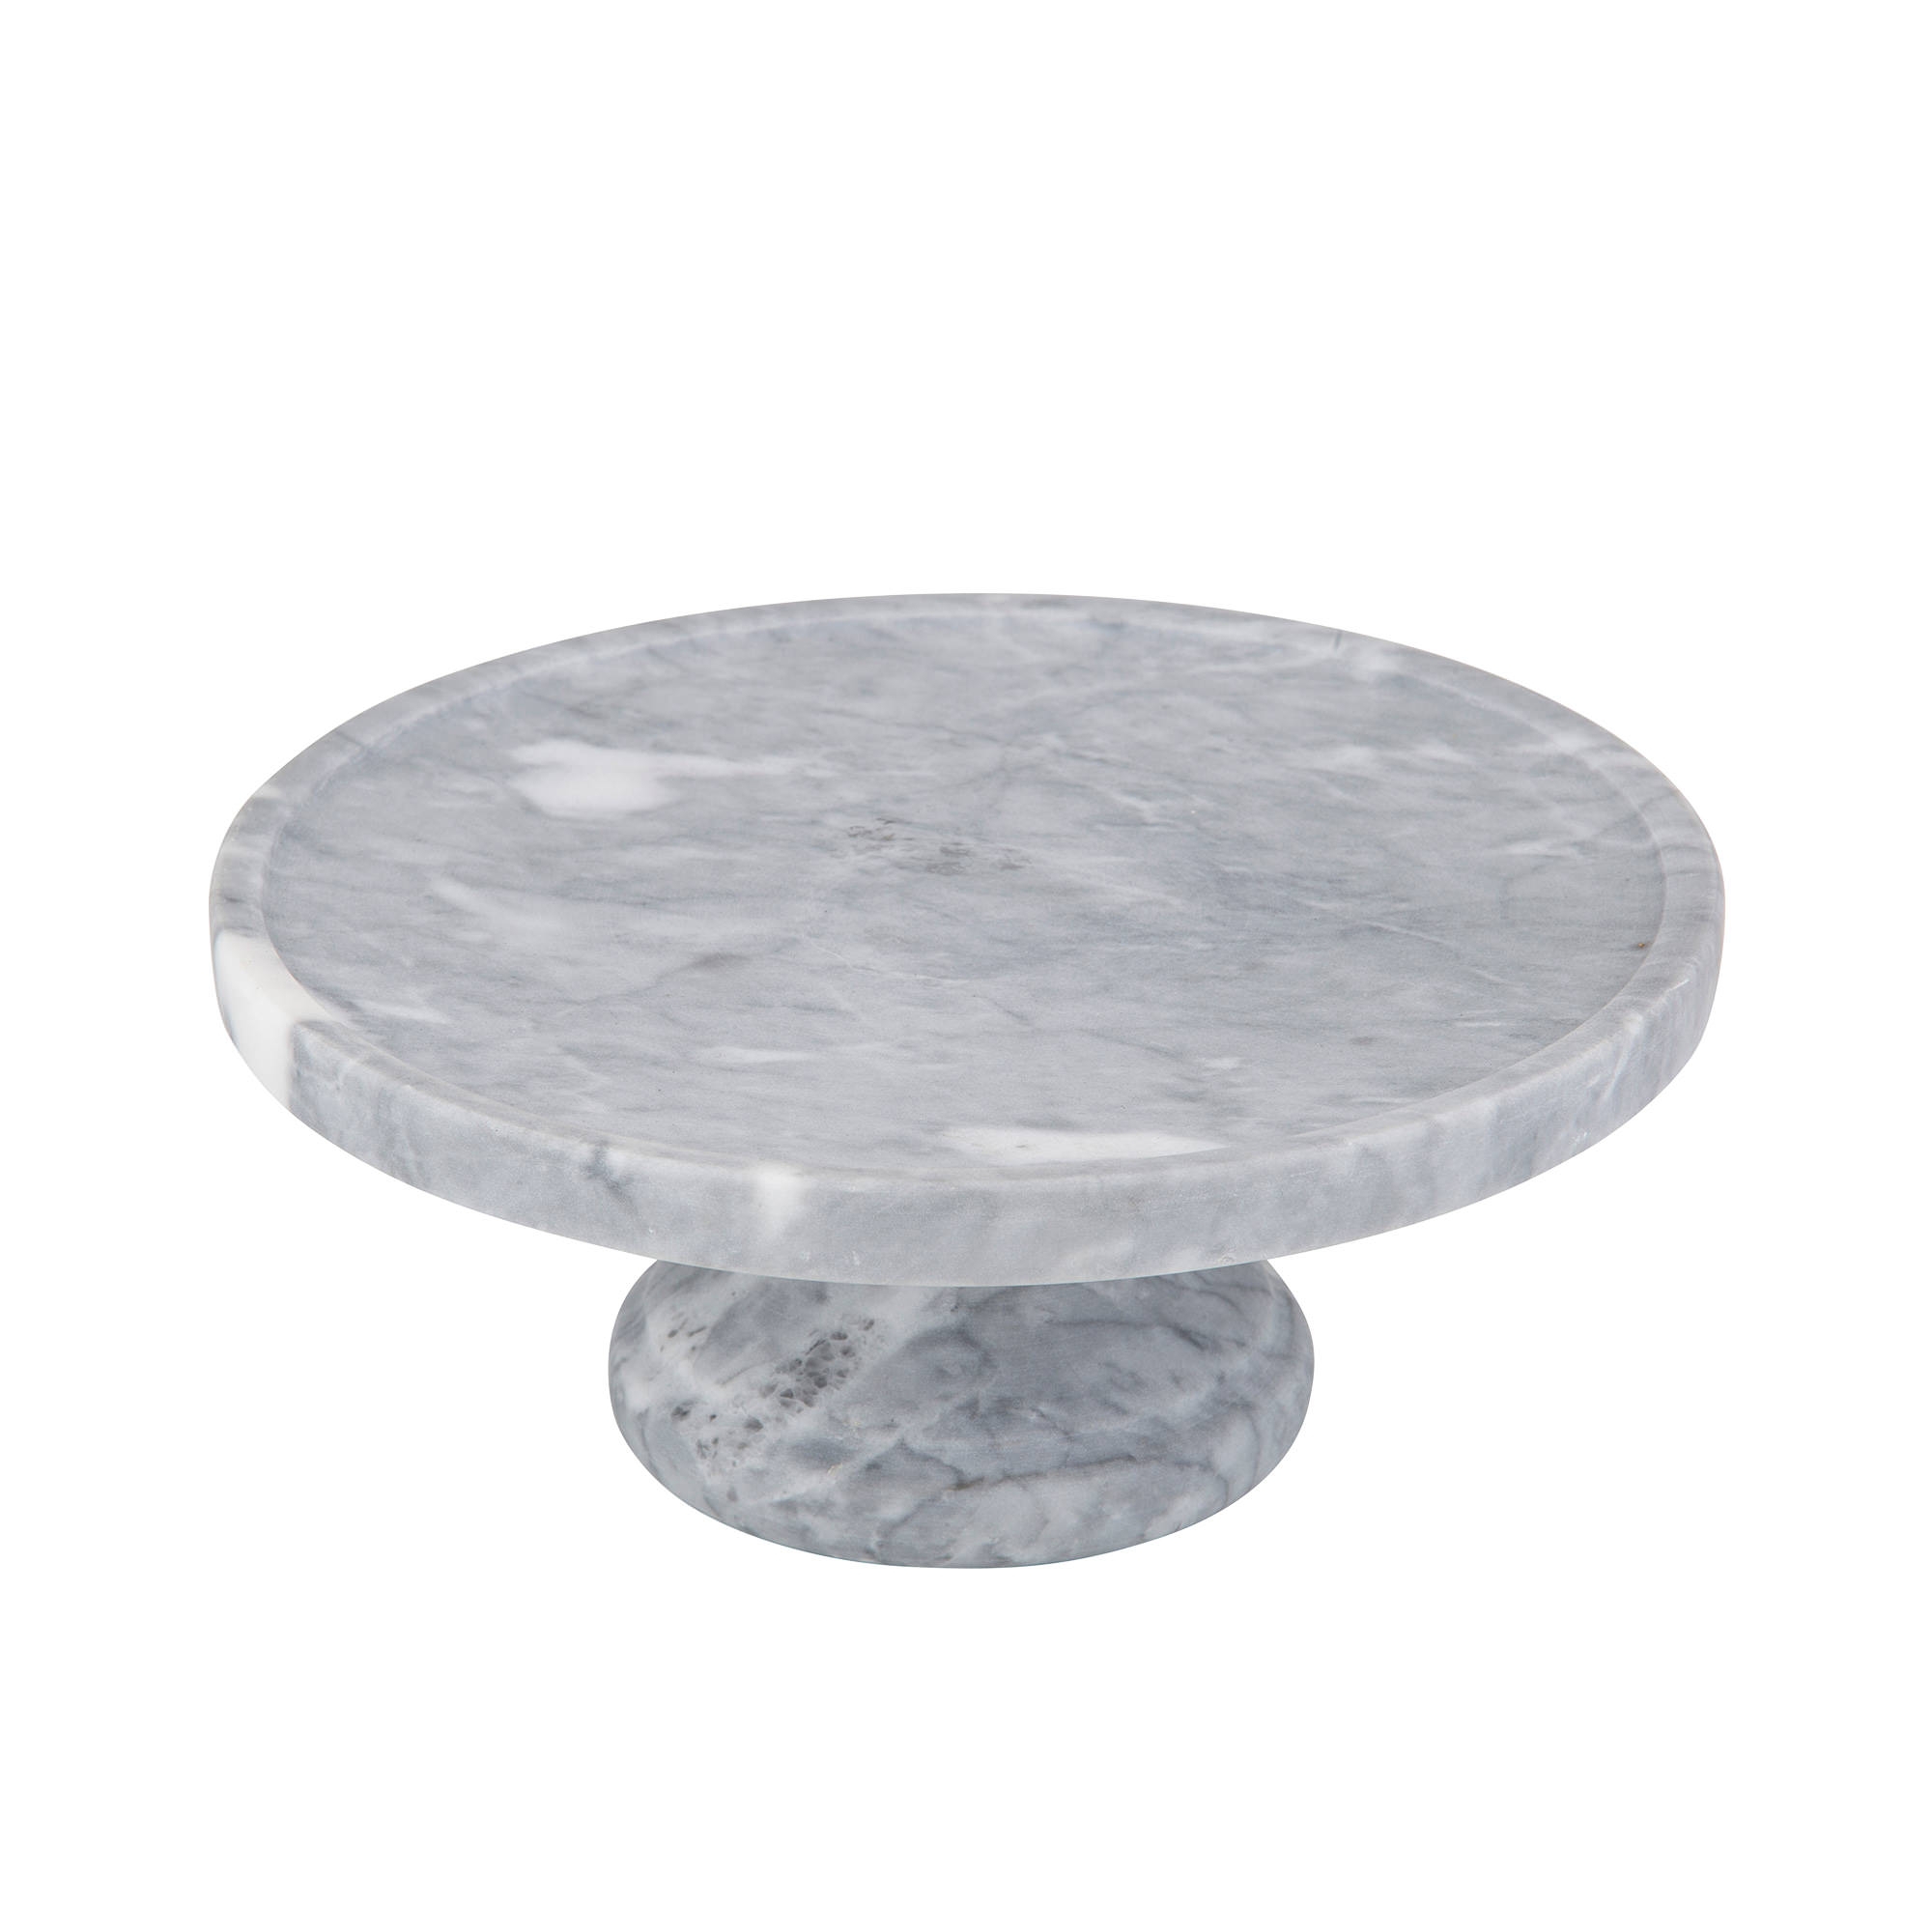 Davis & Waddell Nuvolo Marble Footed Cake Stand 25cm Image 1